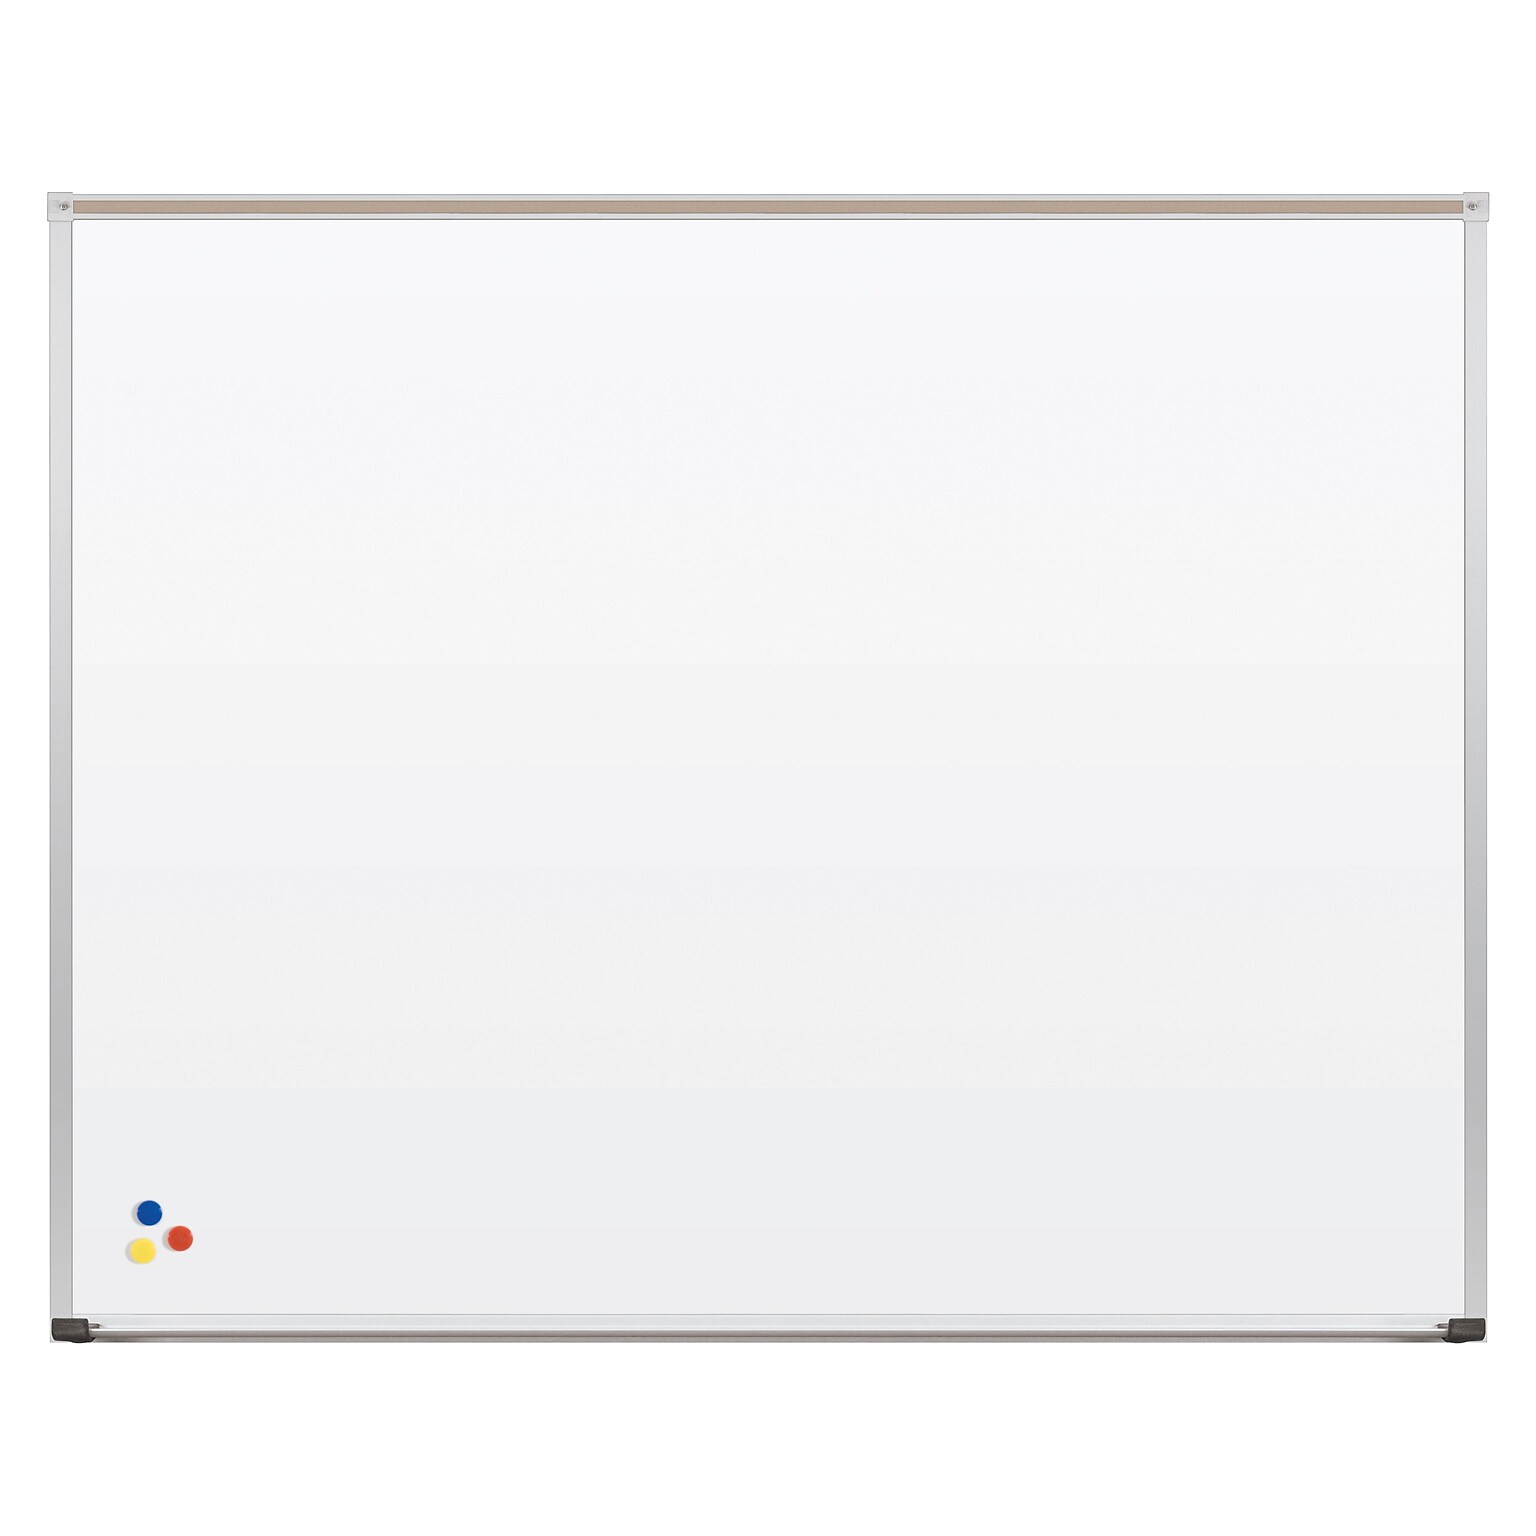 Best-Rite Deluxe Porcelain Dry-Erase Whiteboard, Anodized Aluminum Frame, 5 x 4 (202AF-25)